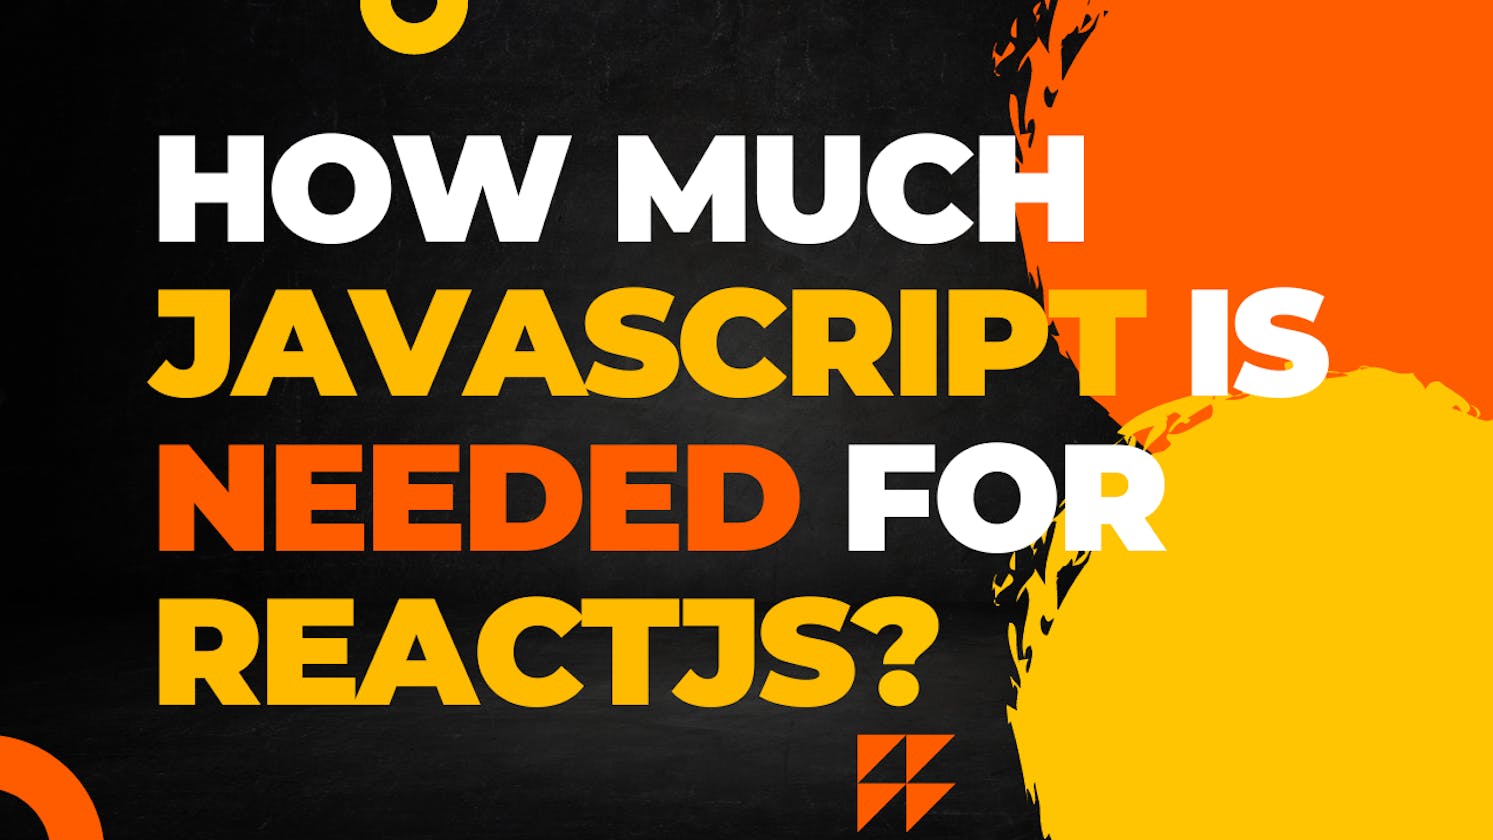 JavaScript for ReactJS: How Much Do You Need to Learn?